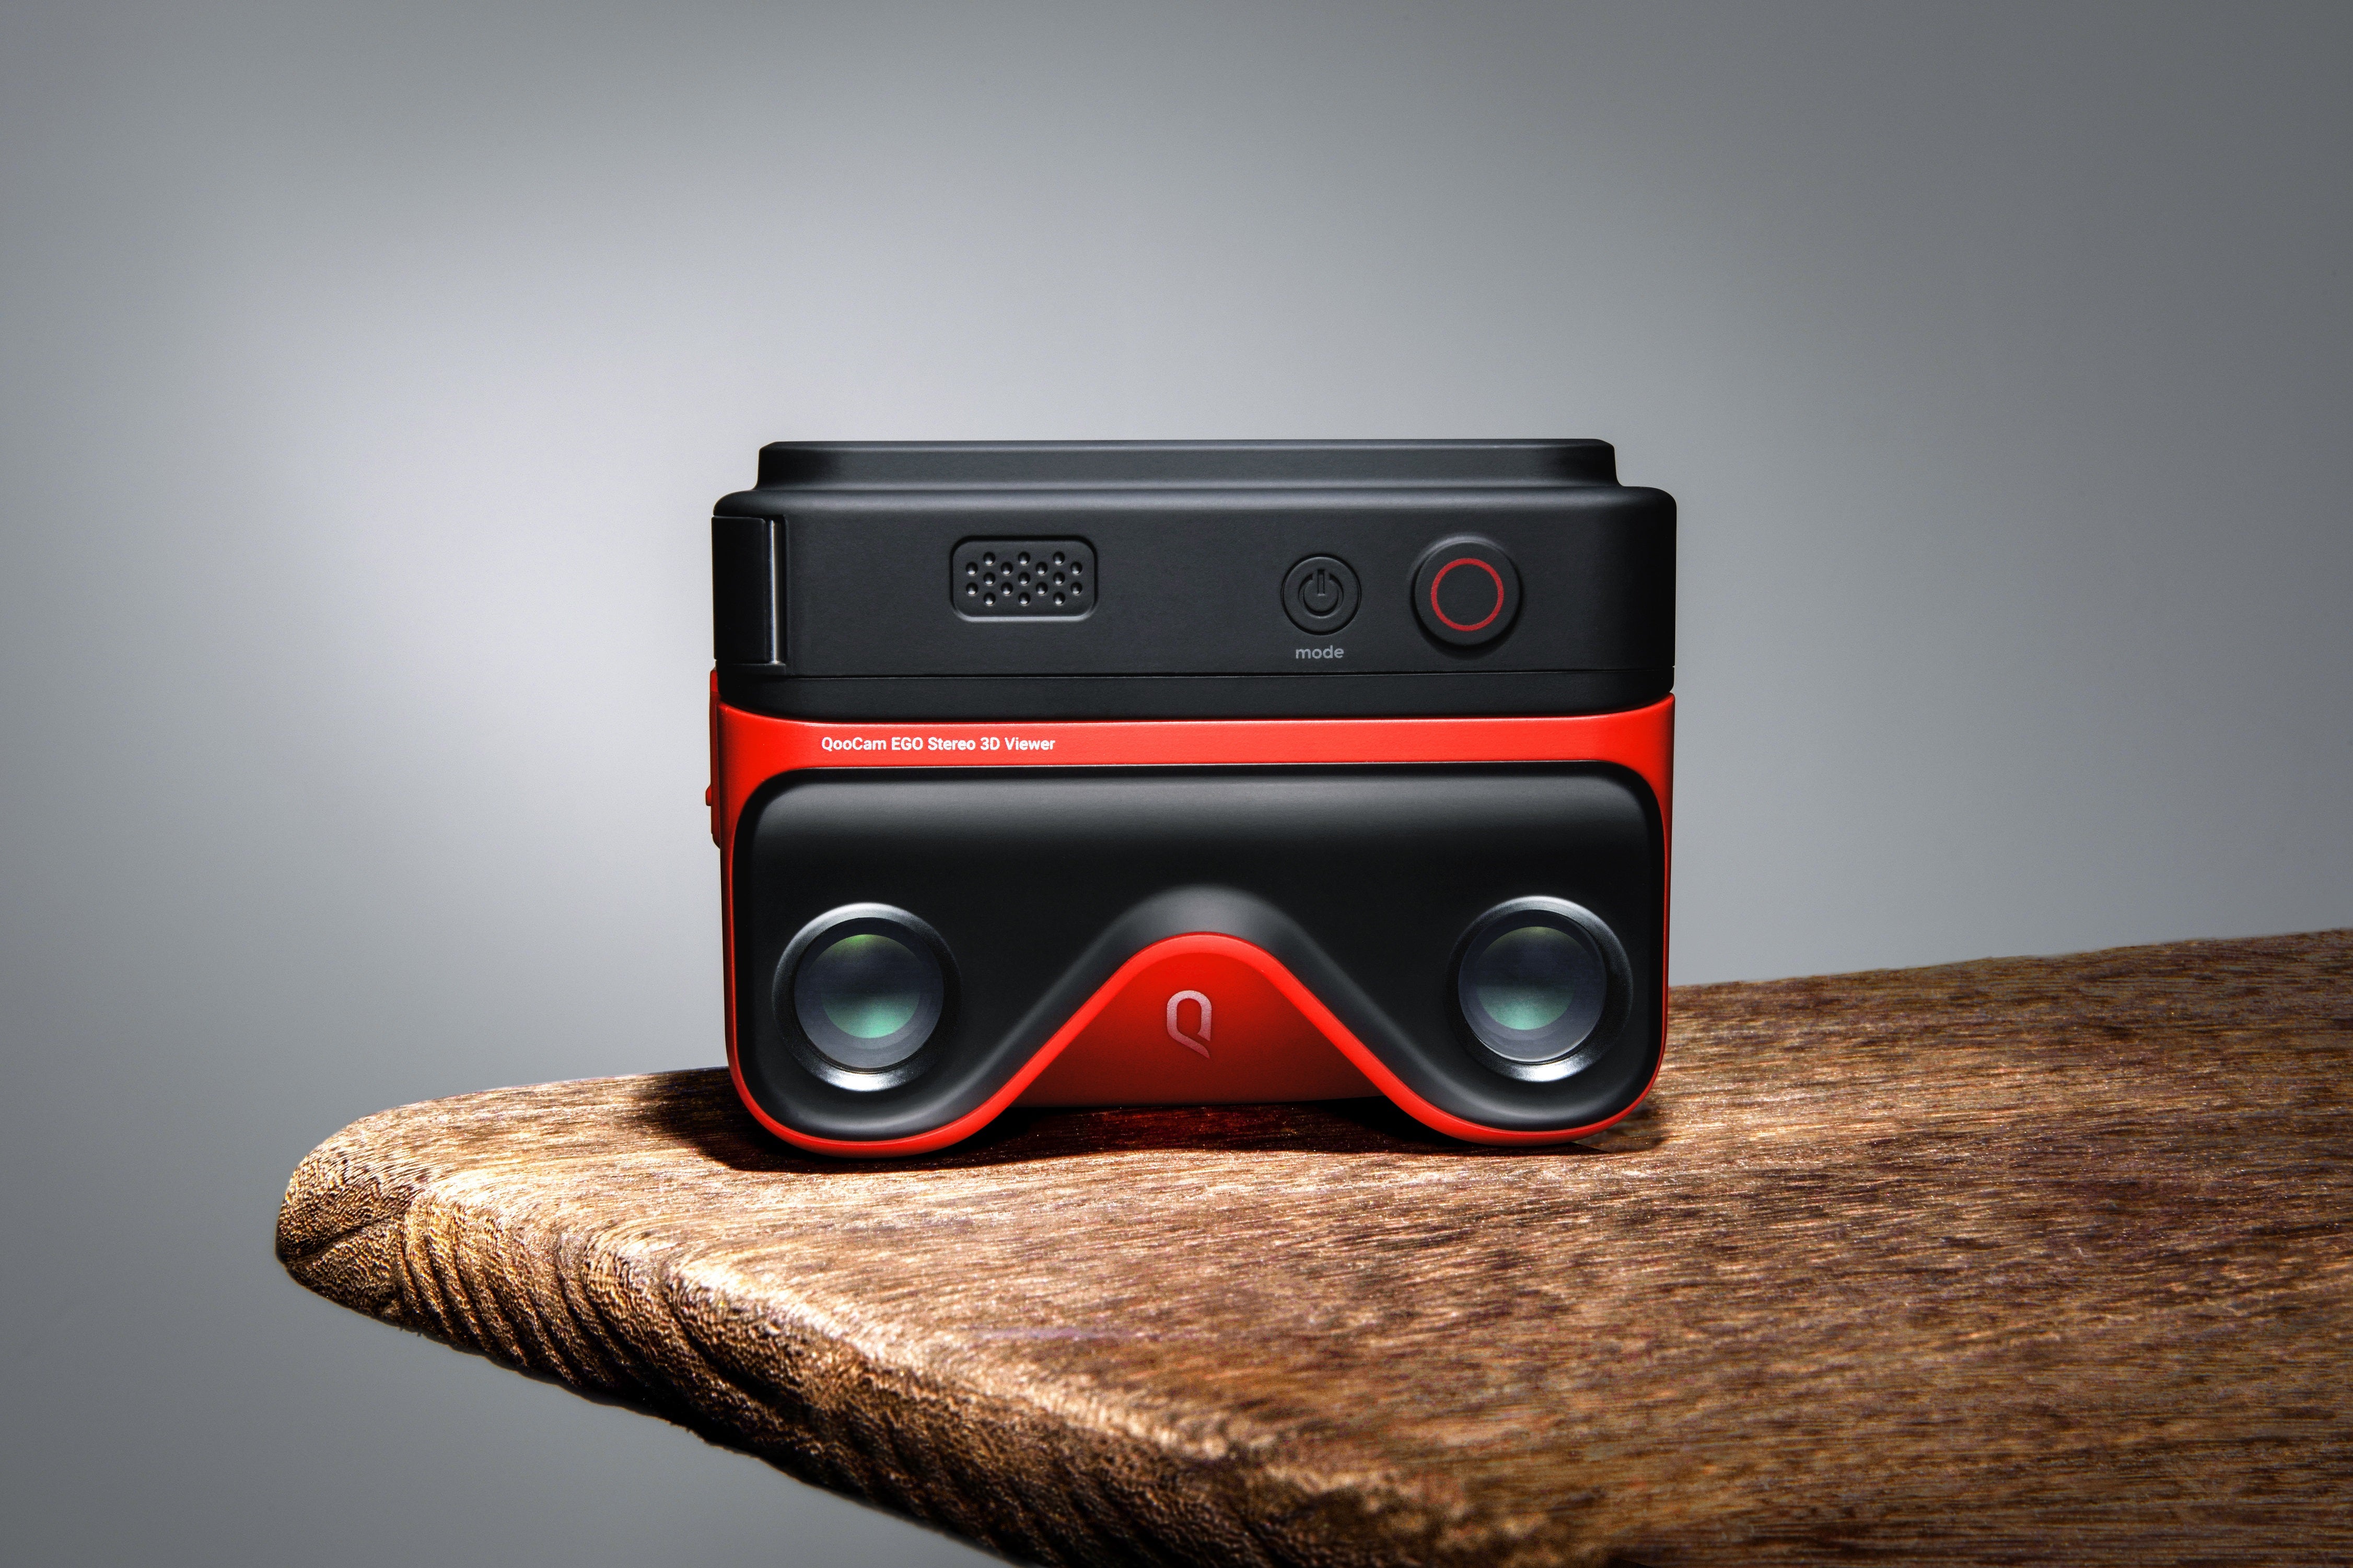 QooCam EGO the world's first view and instant-play 3D camera